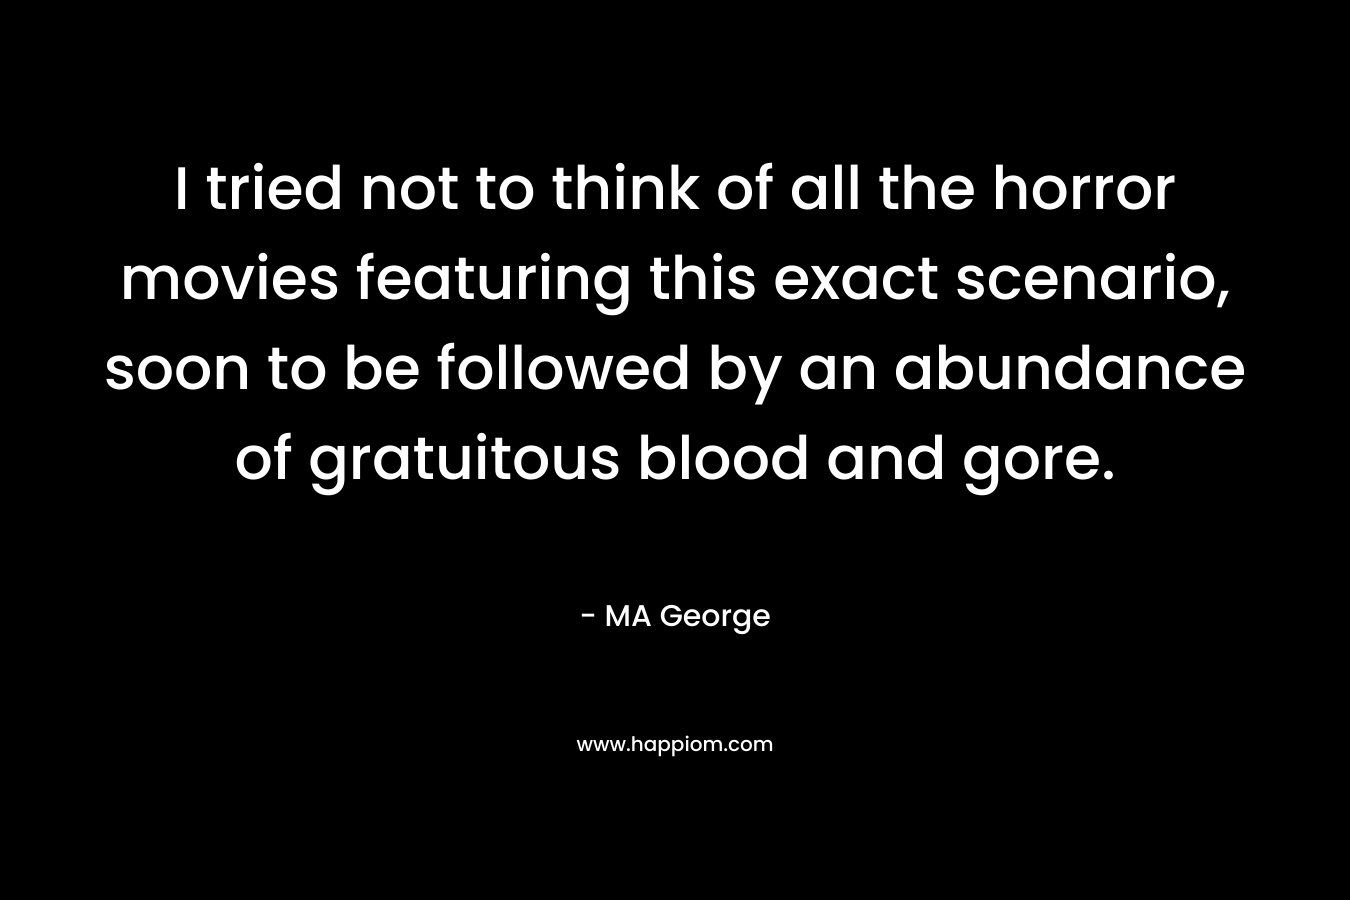 I tried not to think of all the horror movies featuring this exact scenario, soon to be followed by an abundance of gratuitous blood and gore. – MA George